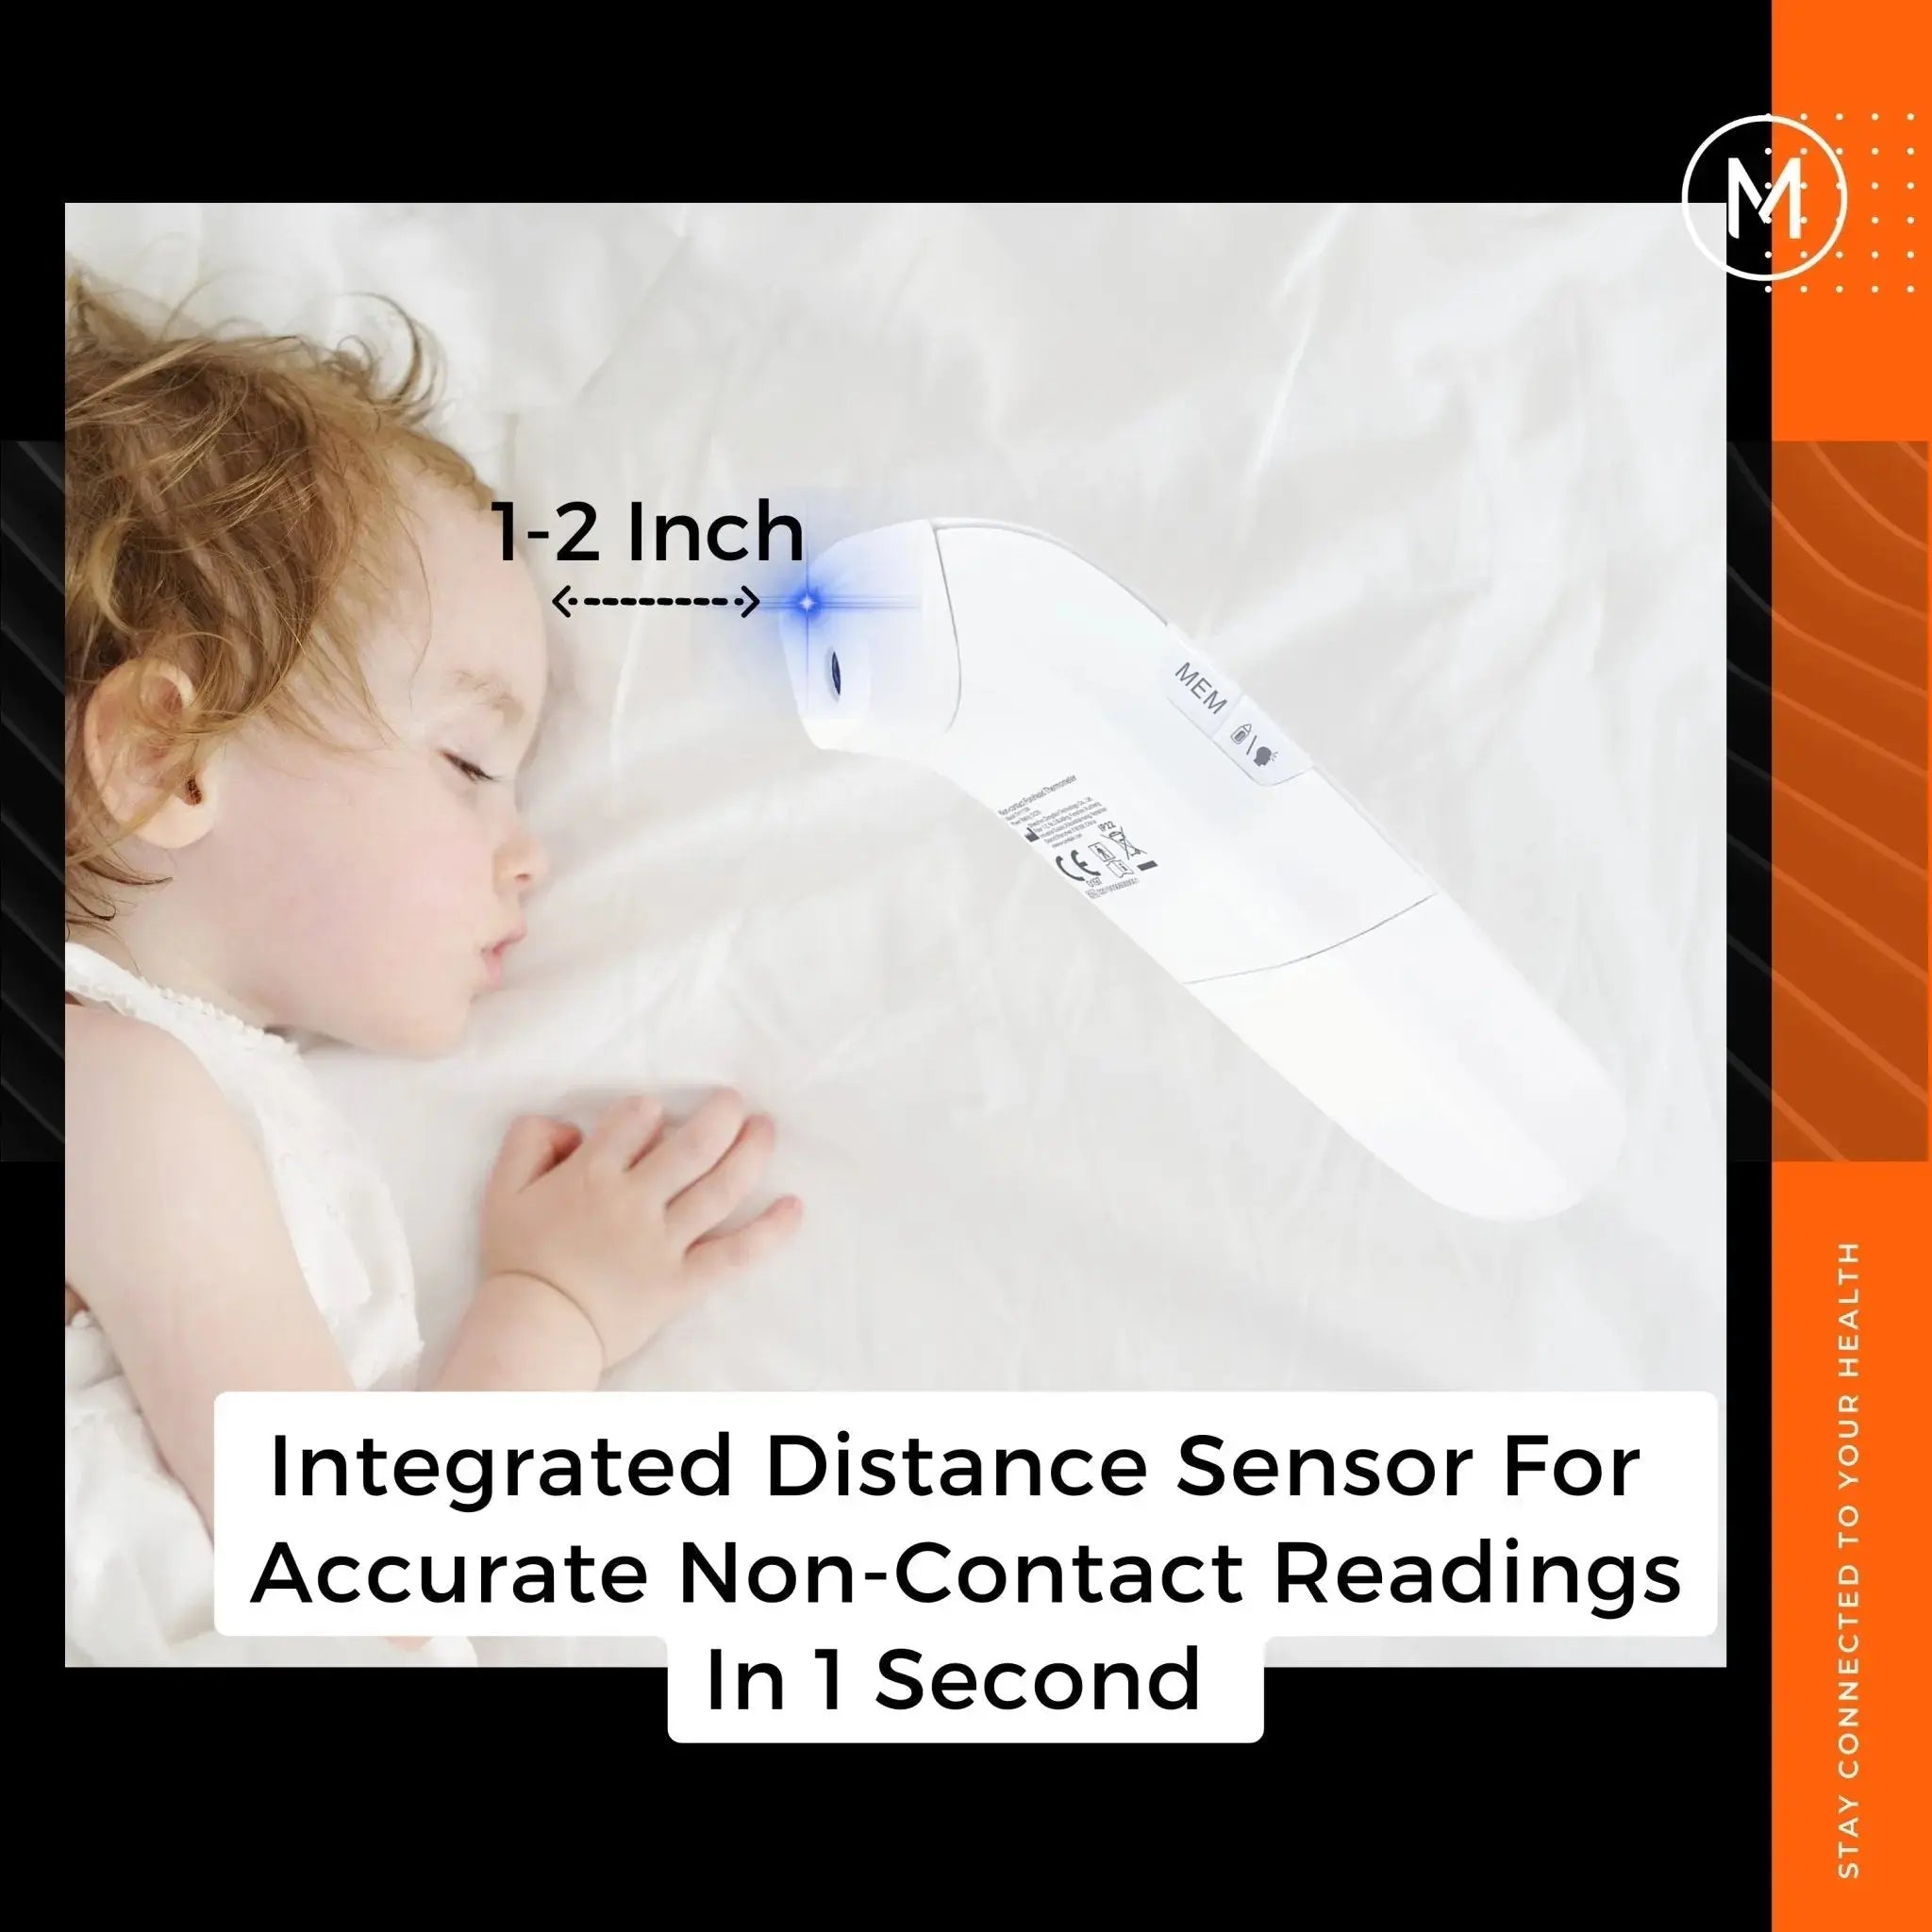 Buy Infrared Forehead Thermometer in USA